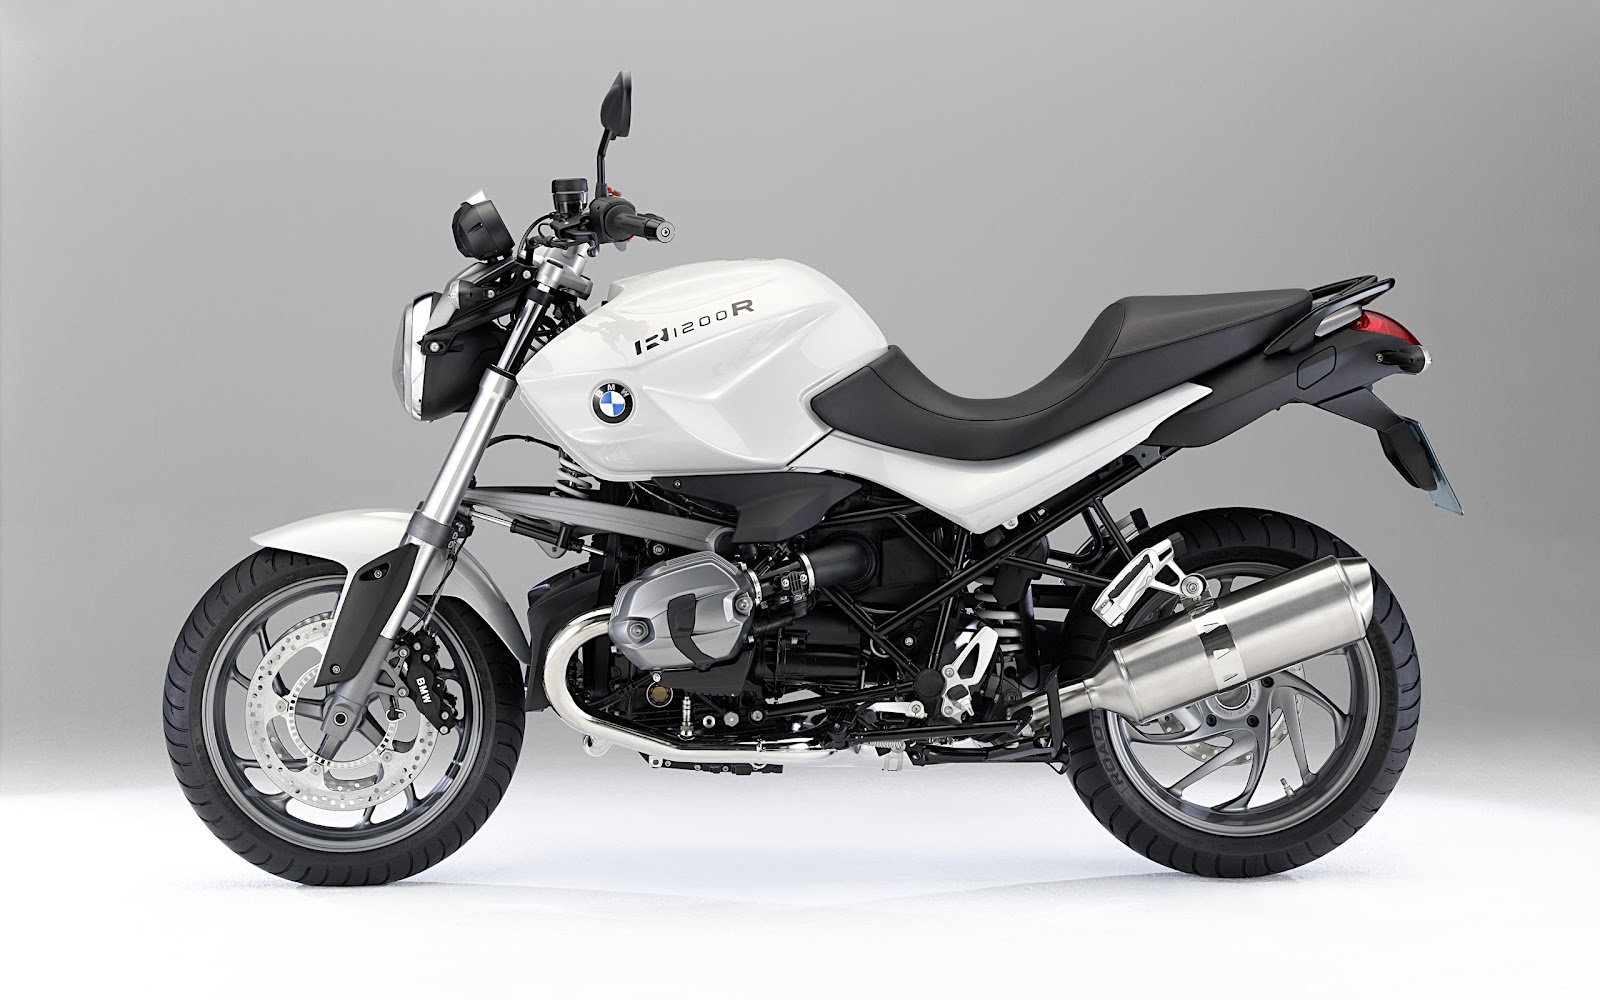 BMW R 1200 R Motorcycle HD Wallpapers| HD Wallpapers ,Backgrounds